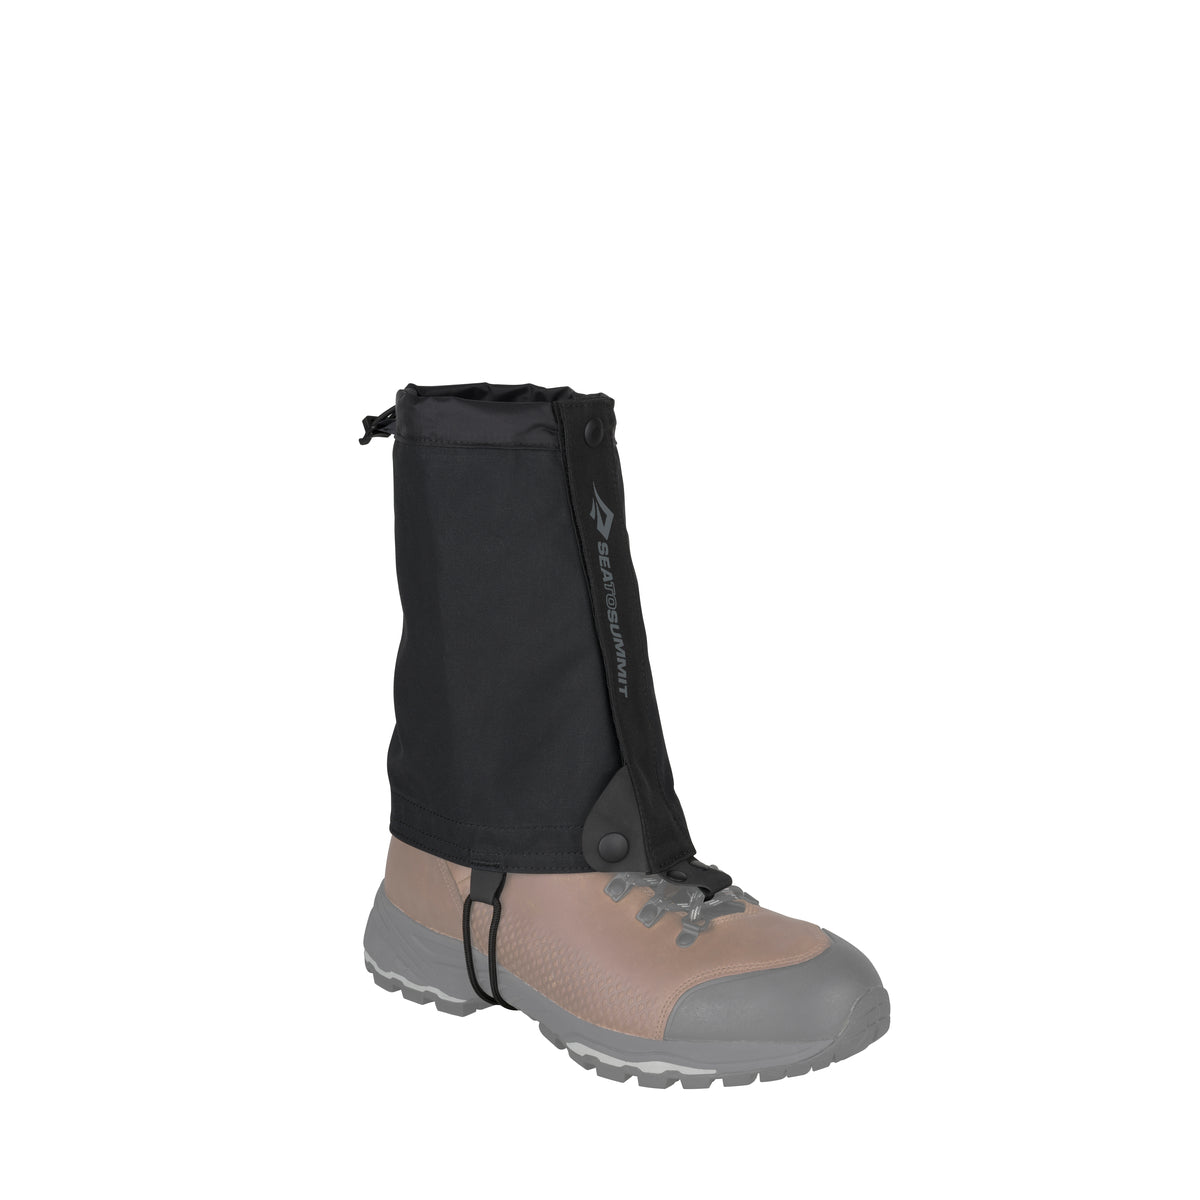 Sea to Summit Spinifex Canvas Ankle Gaiters